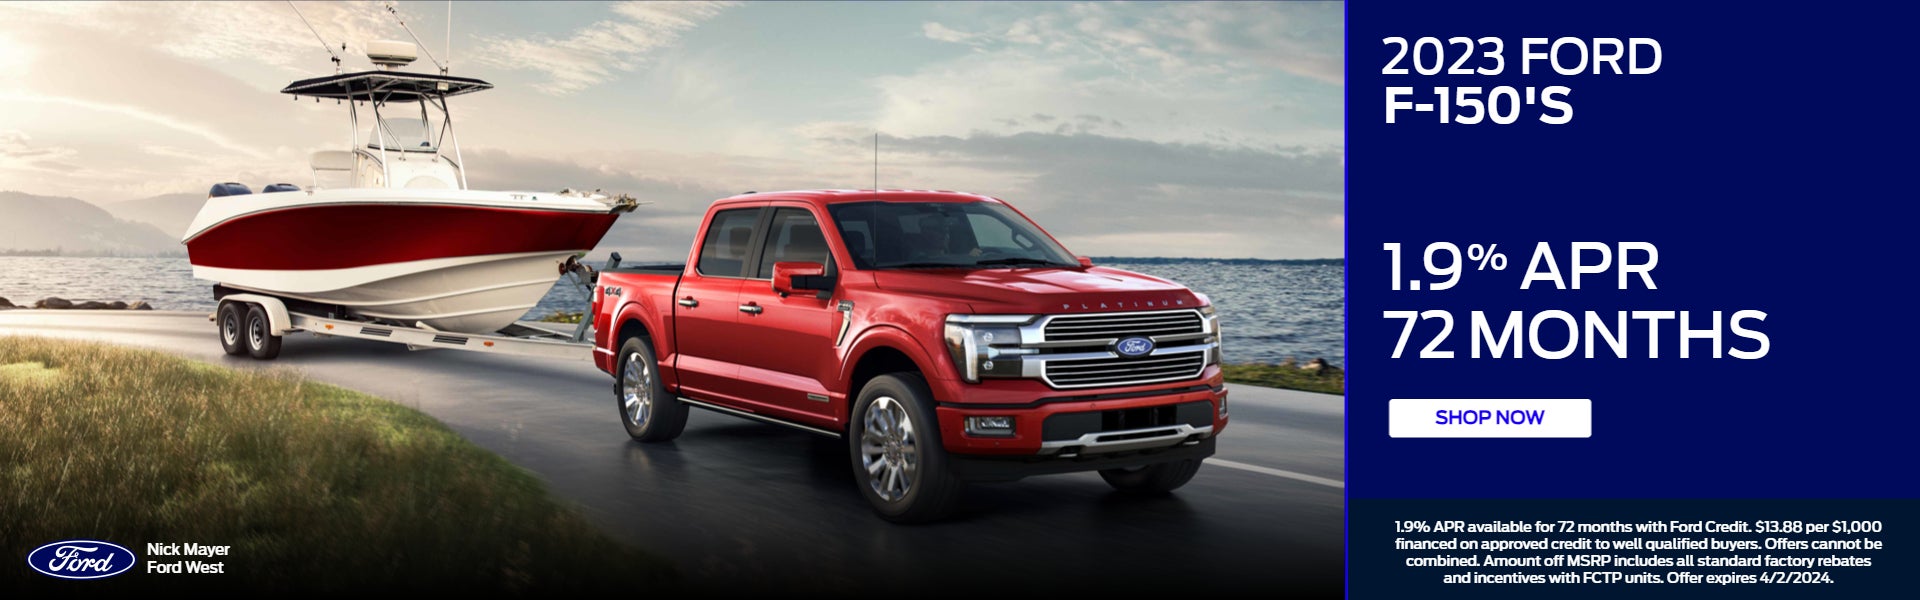 2023 Ford F-150, 1.9% 72 months